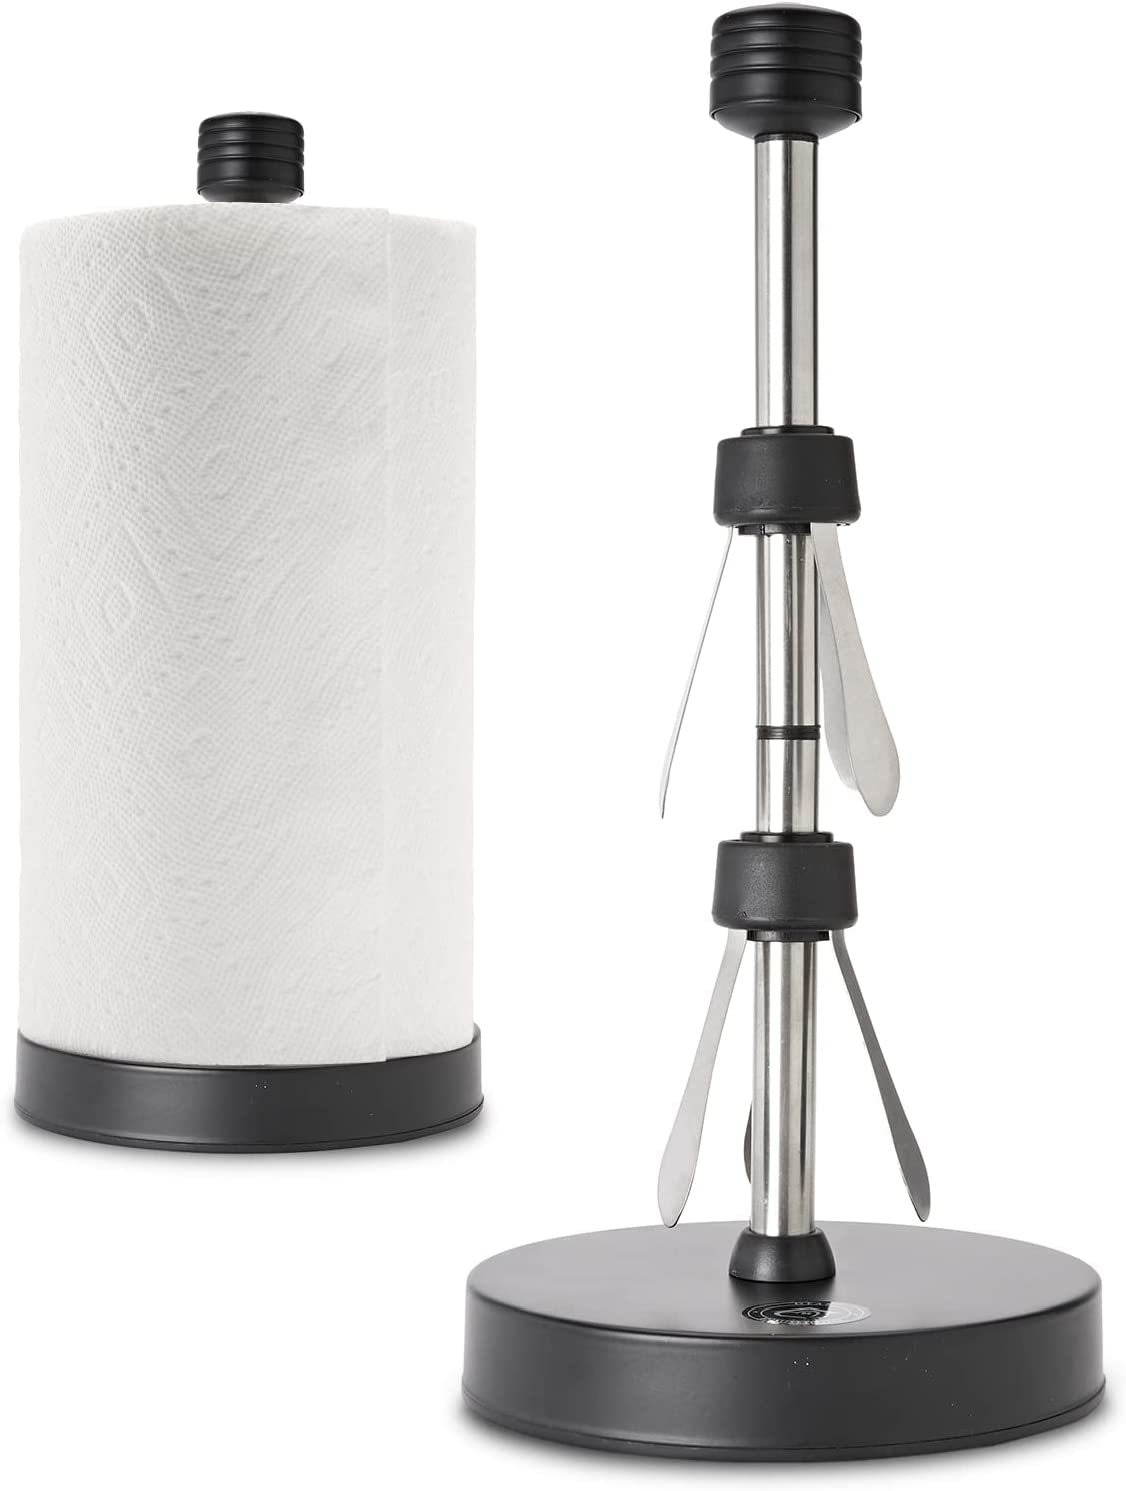 Counter Top Stainless Steel Paper Towel Holder Stand Designed for Easy One-  Handed Operation (BLACK) - Dear Household